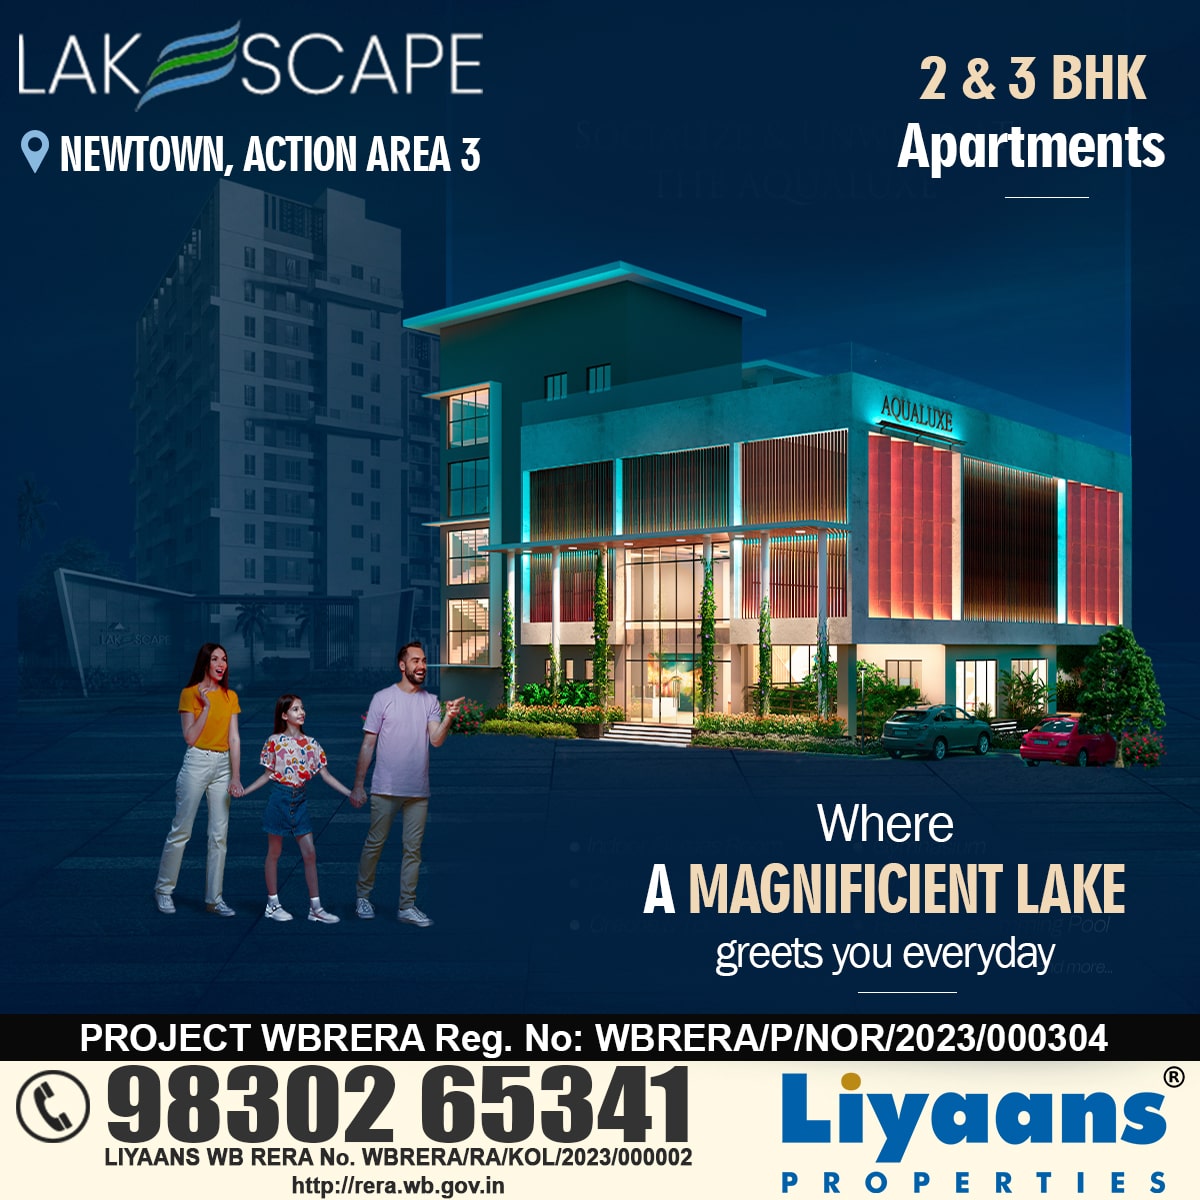 Elevate your living experience at Merlin Lakescape, a luxurious 2/3 BHK apartment development in the heart of Newtown, Kolkata. Call us for more details 9830265341 or visit: bit.ly/3UrVDiD

#MerlinLakescape #LuxuryLiving #ModernApartments #NewtownKolkata #PrimeLocation